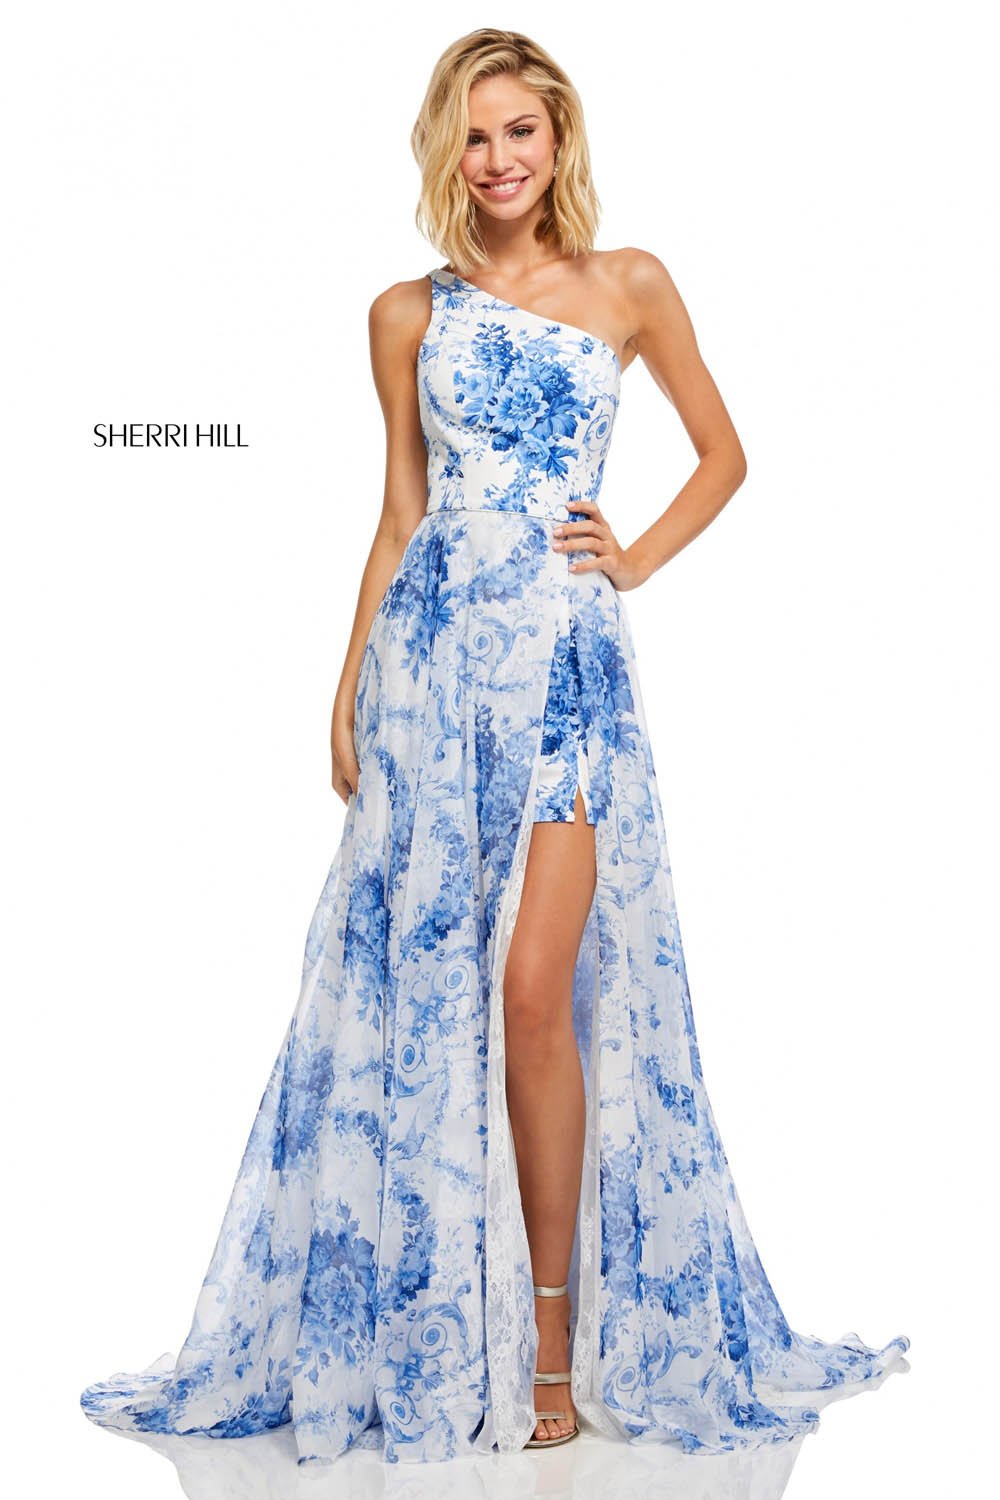 Sherri Hill 52728 dress images in these colors: Ivory Blue Print.